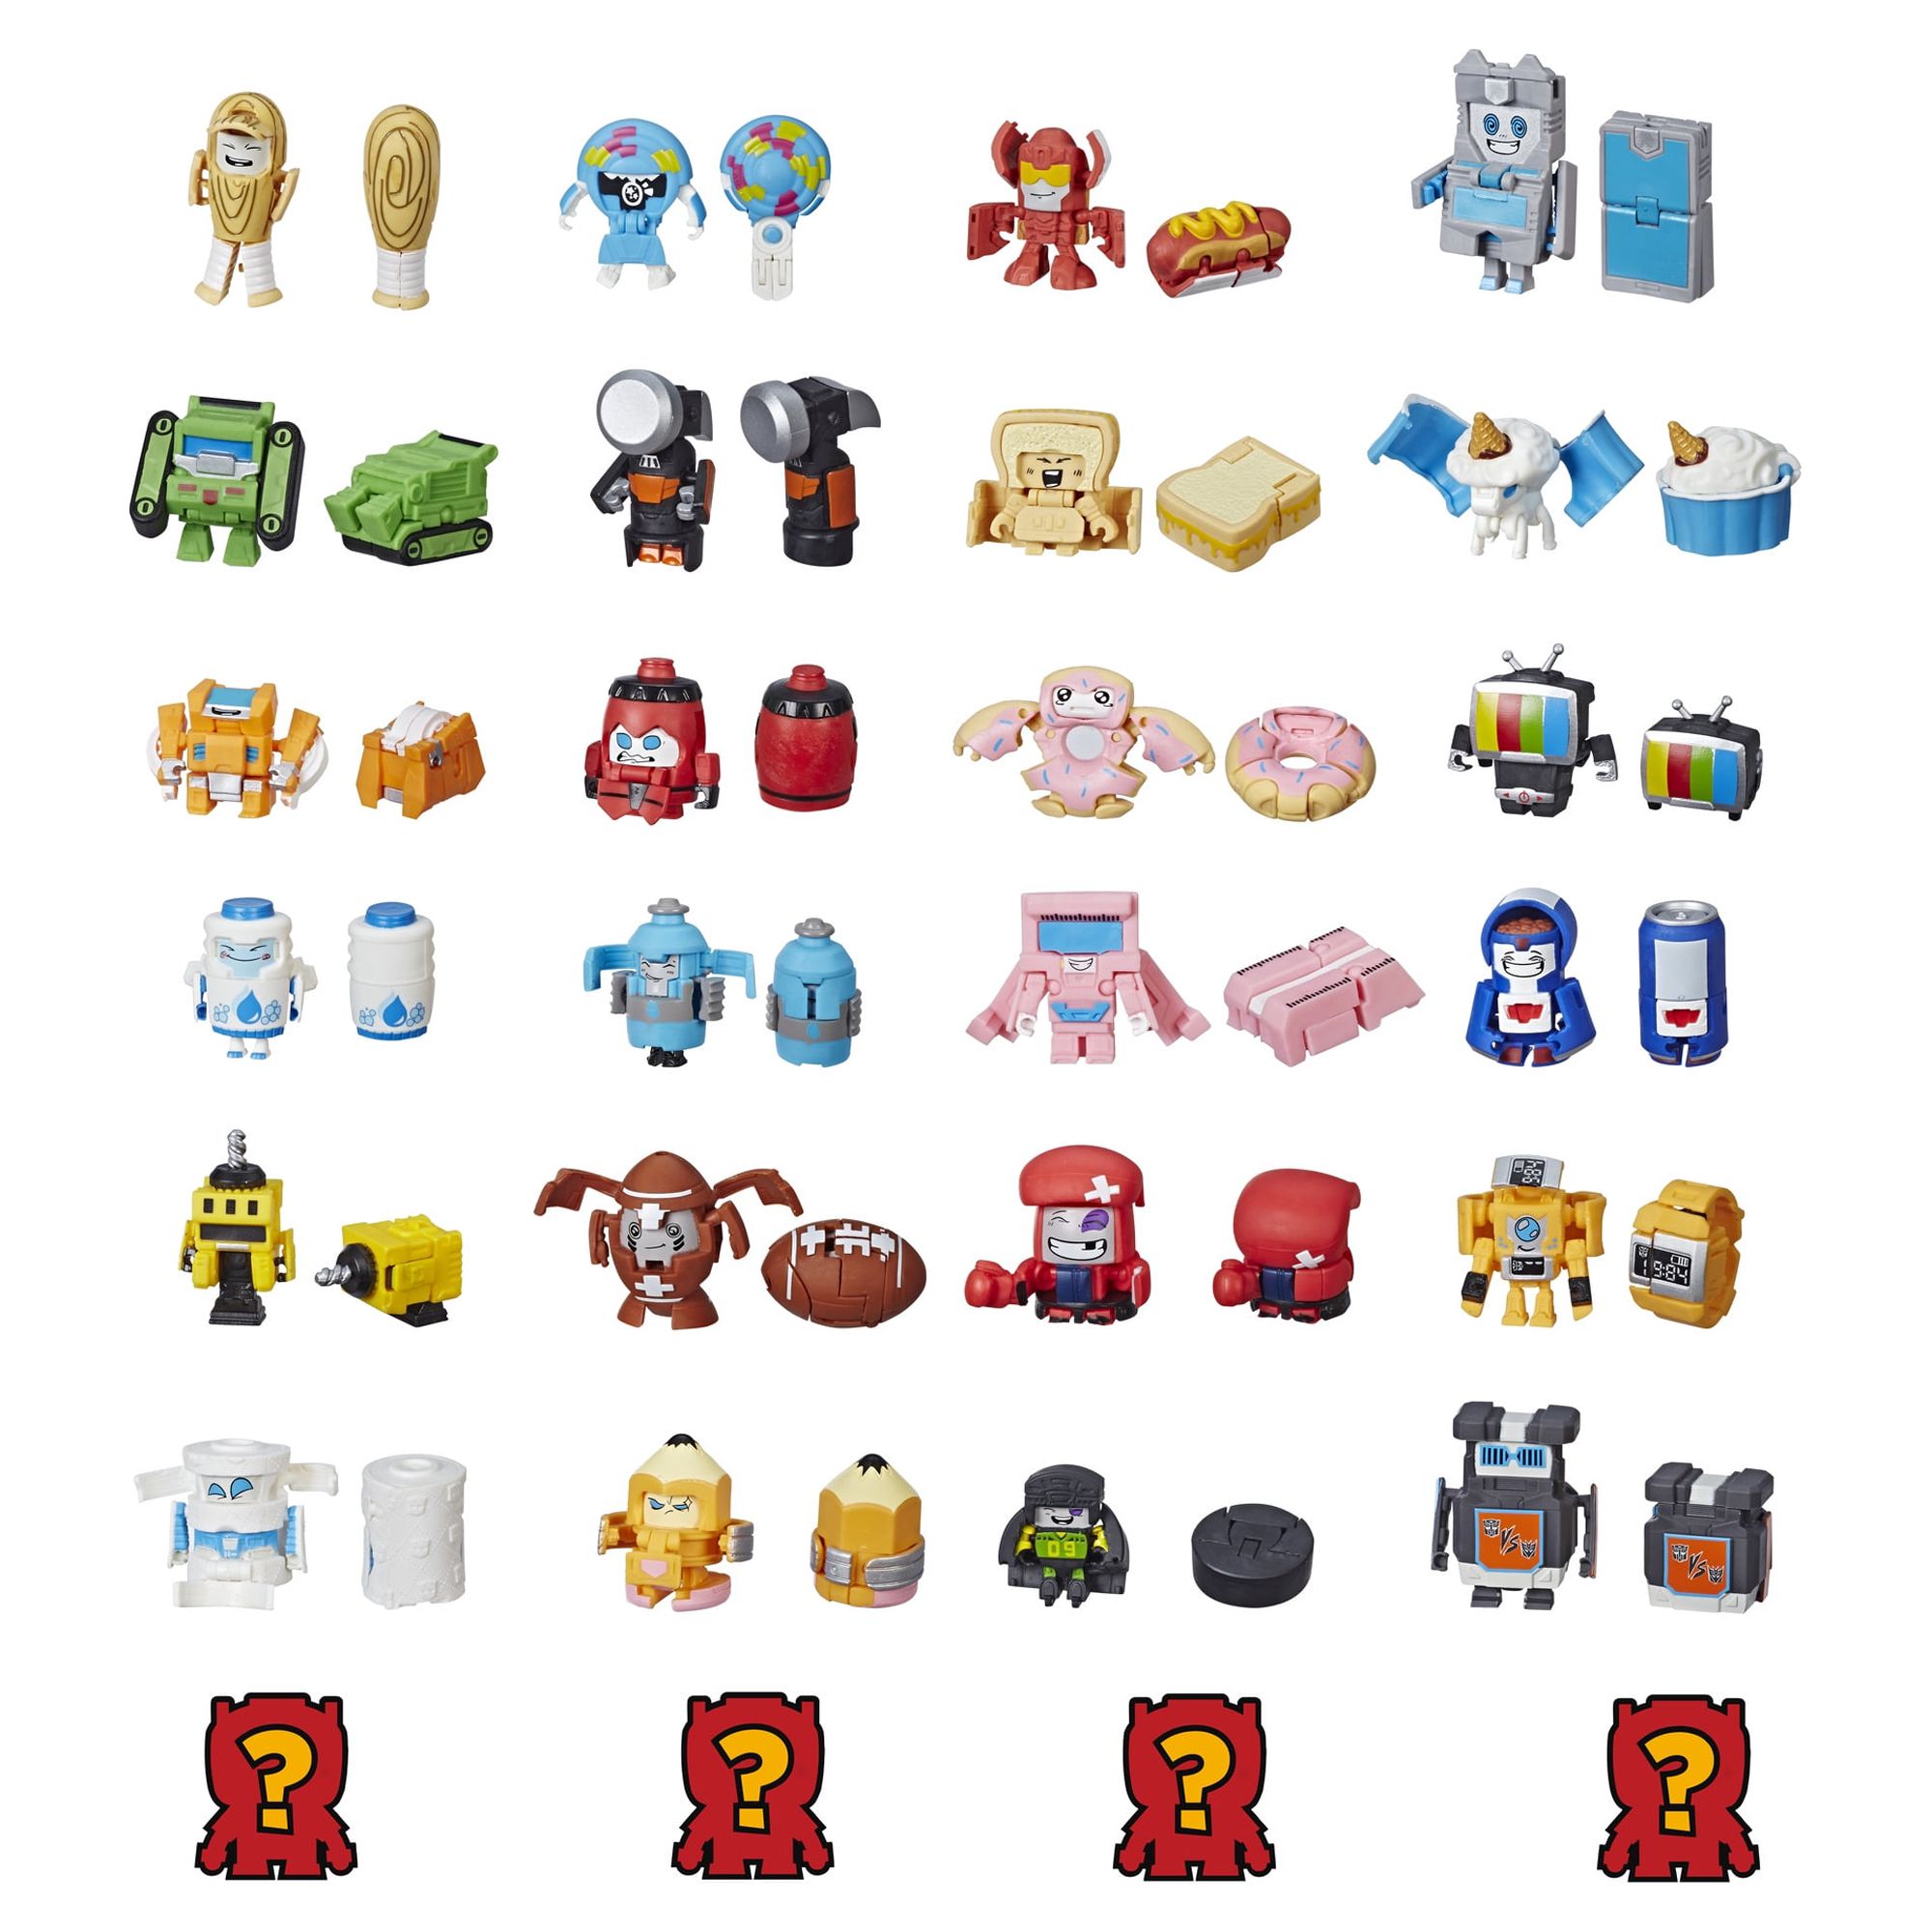 Transformers BotBots Toys Series 1 Jock Squad 8-Pack Collectible Figures - image 2 of 5